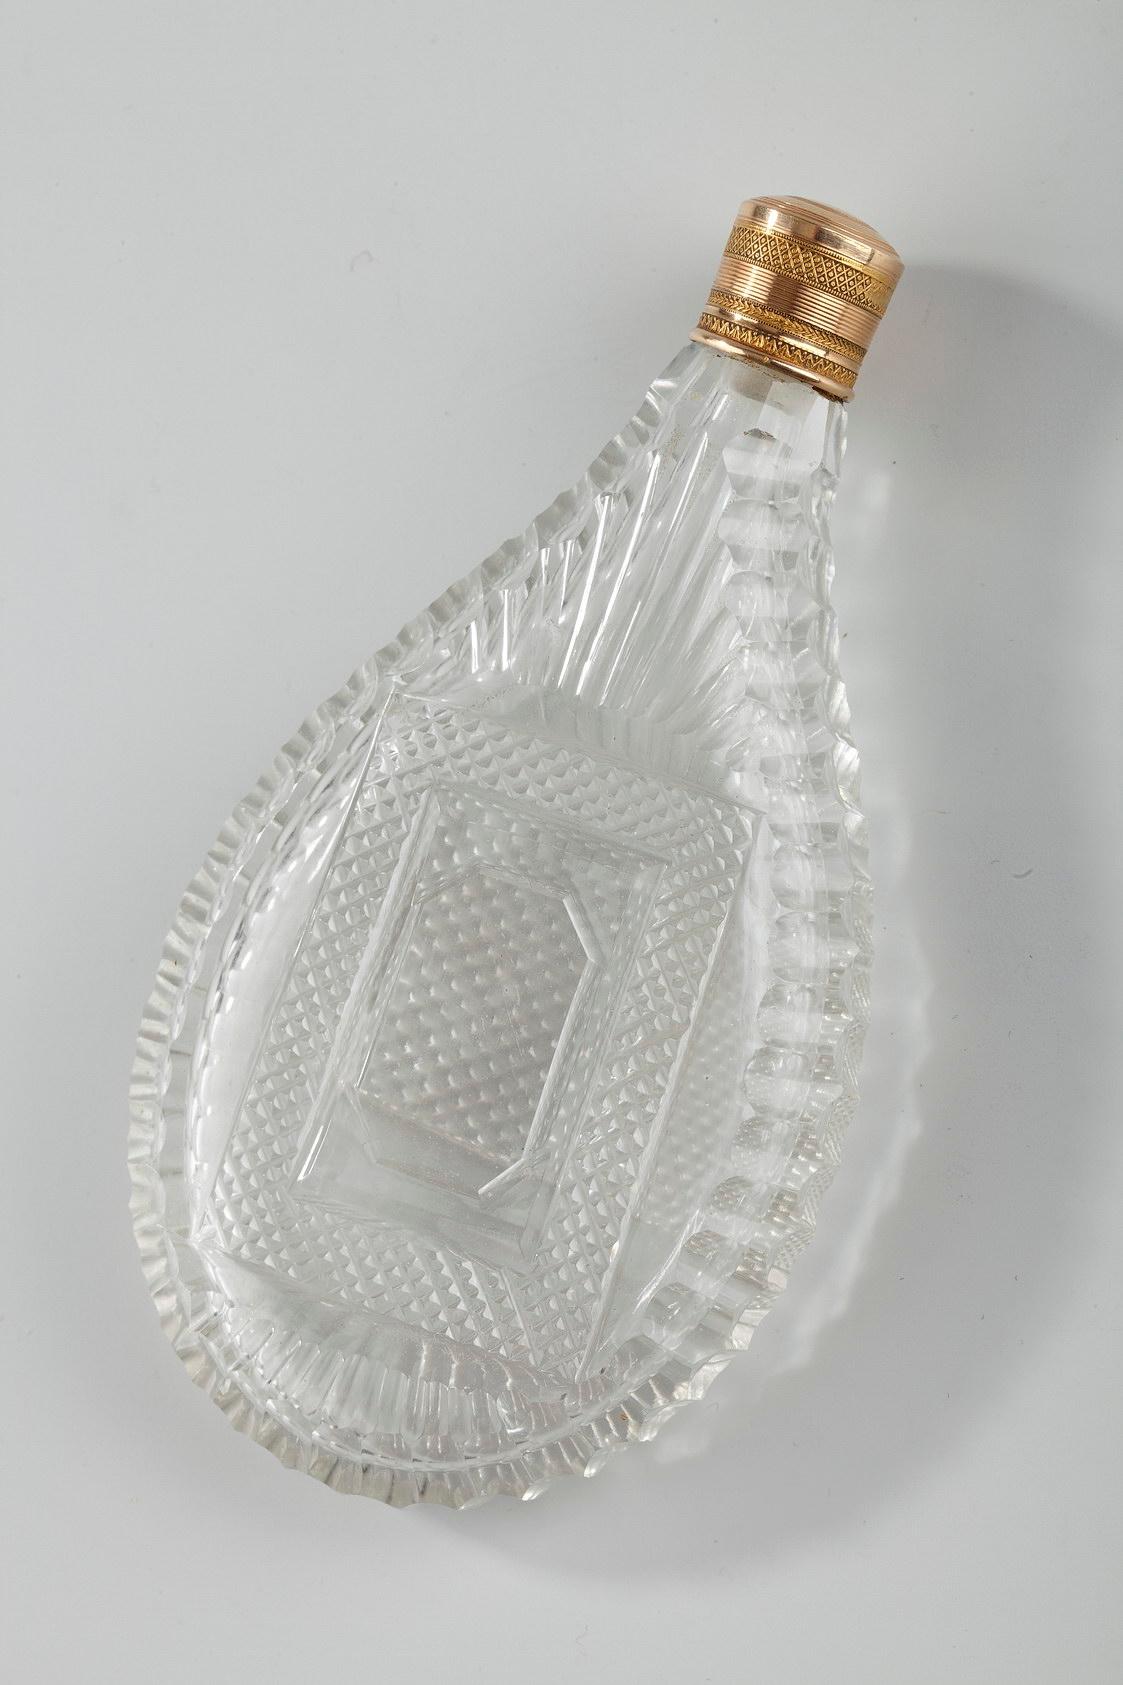 Teardrop-shaped flask in blown and cut crystal. It is embellished with several different decorative patterns: a ridged pattern surrounds the edge; the back side features a rectangular band with a diamond cut pattern and starburst rays above and